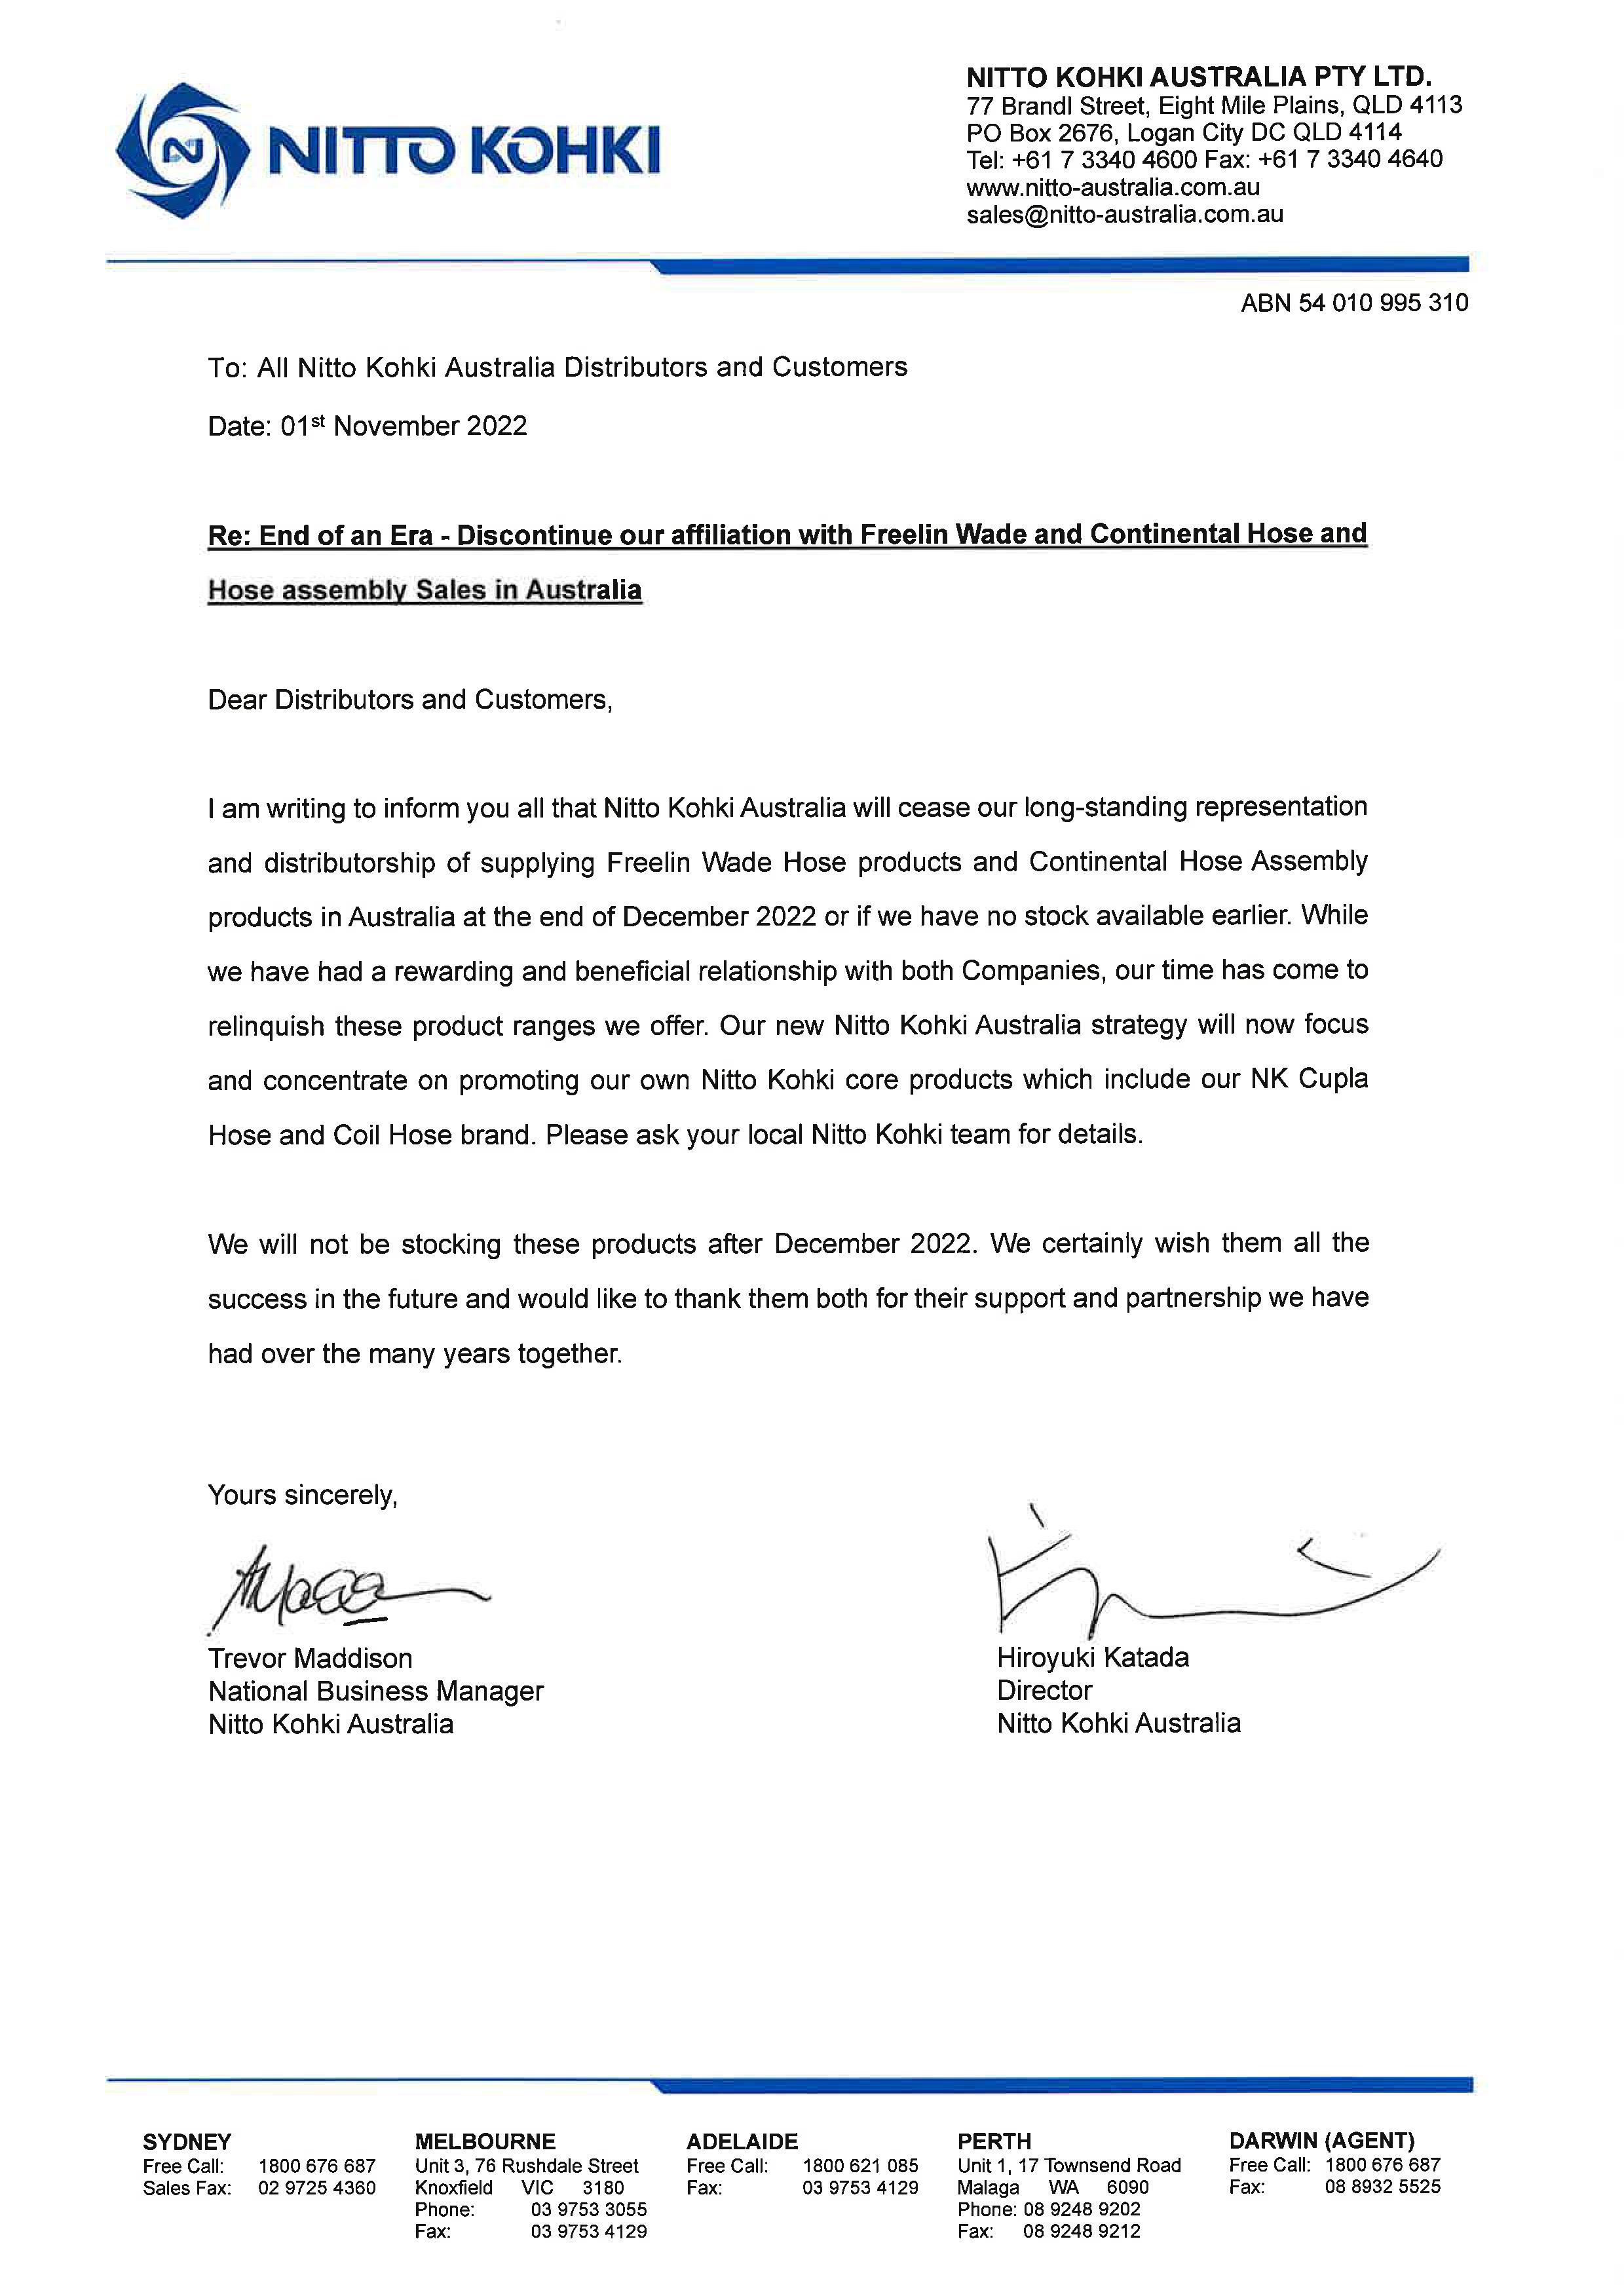 Letter RE Discontinue our affilliation with Freelin Wade & Continental Hoses  01.111